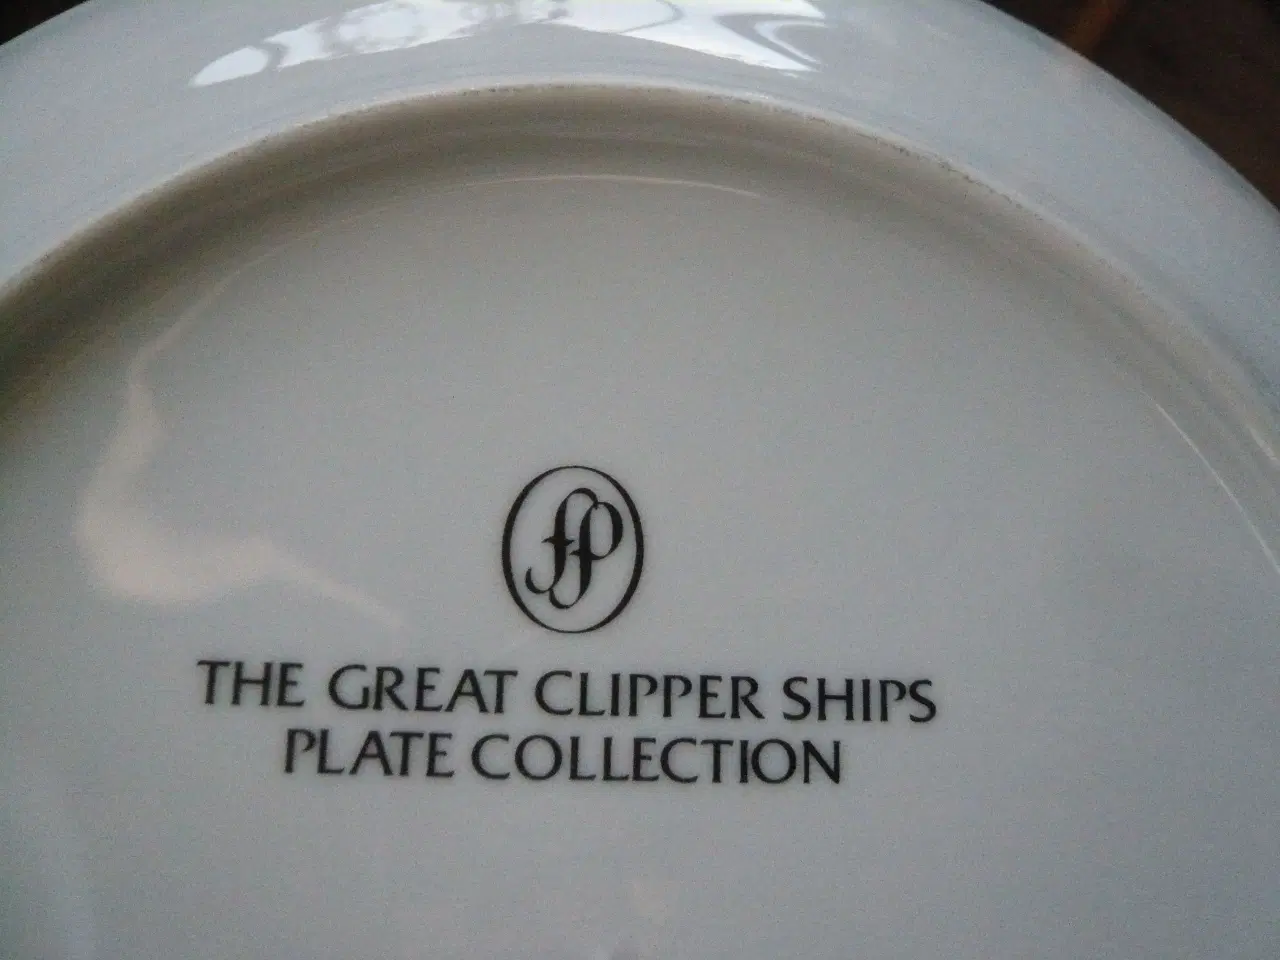 Billede 13 - The Great Clipper Ships plate collection 